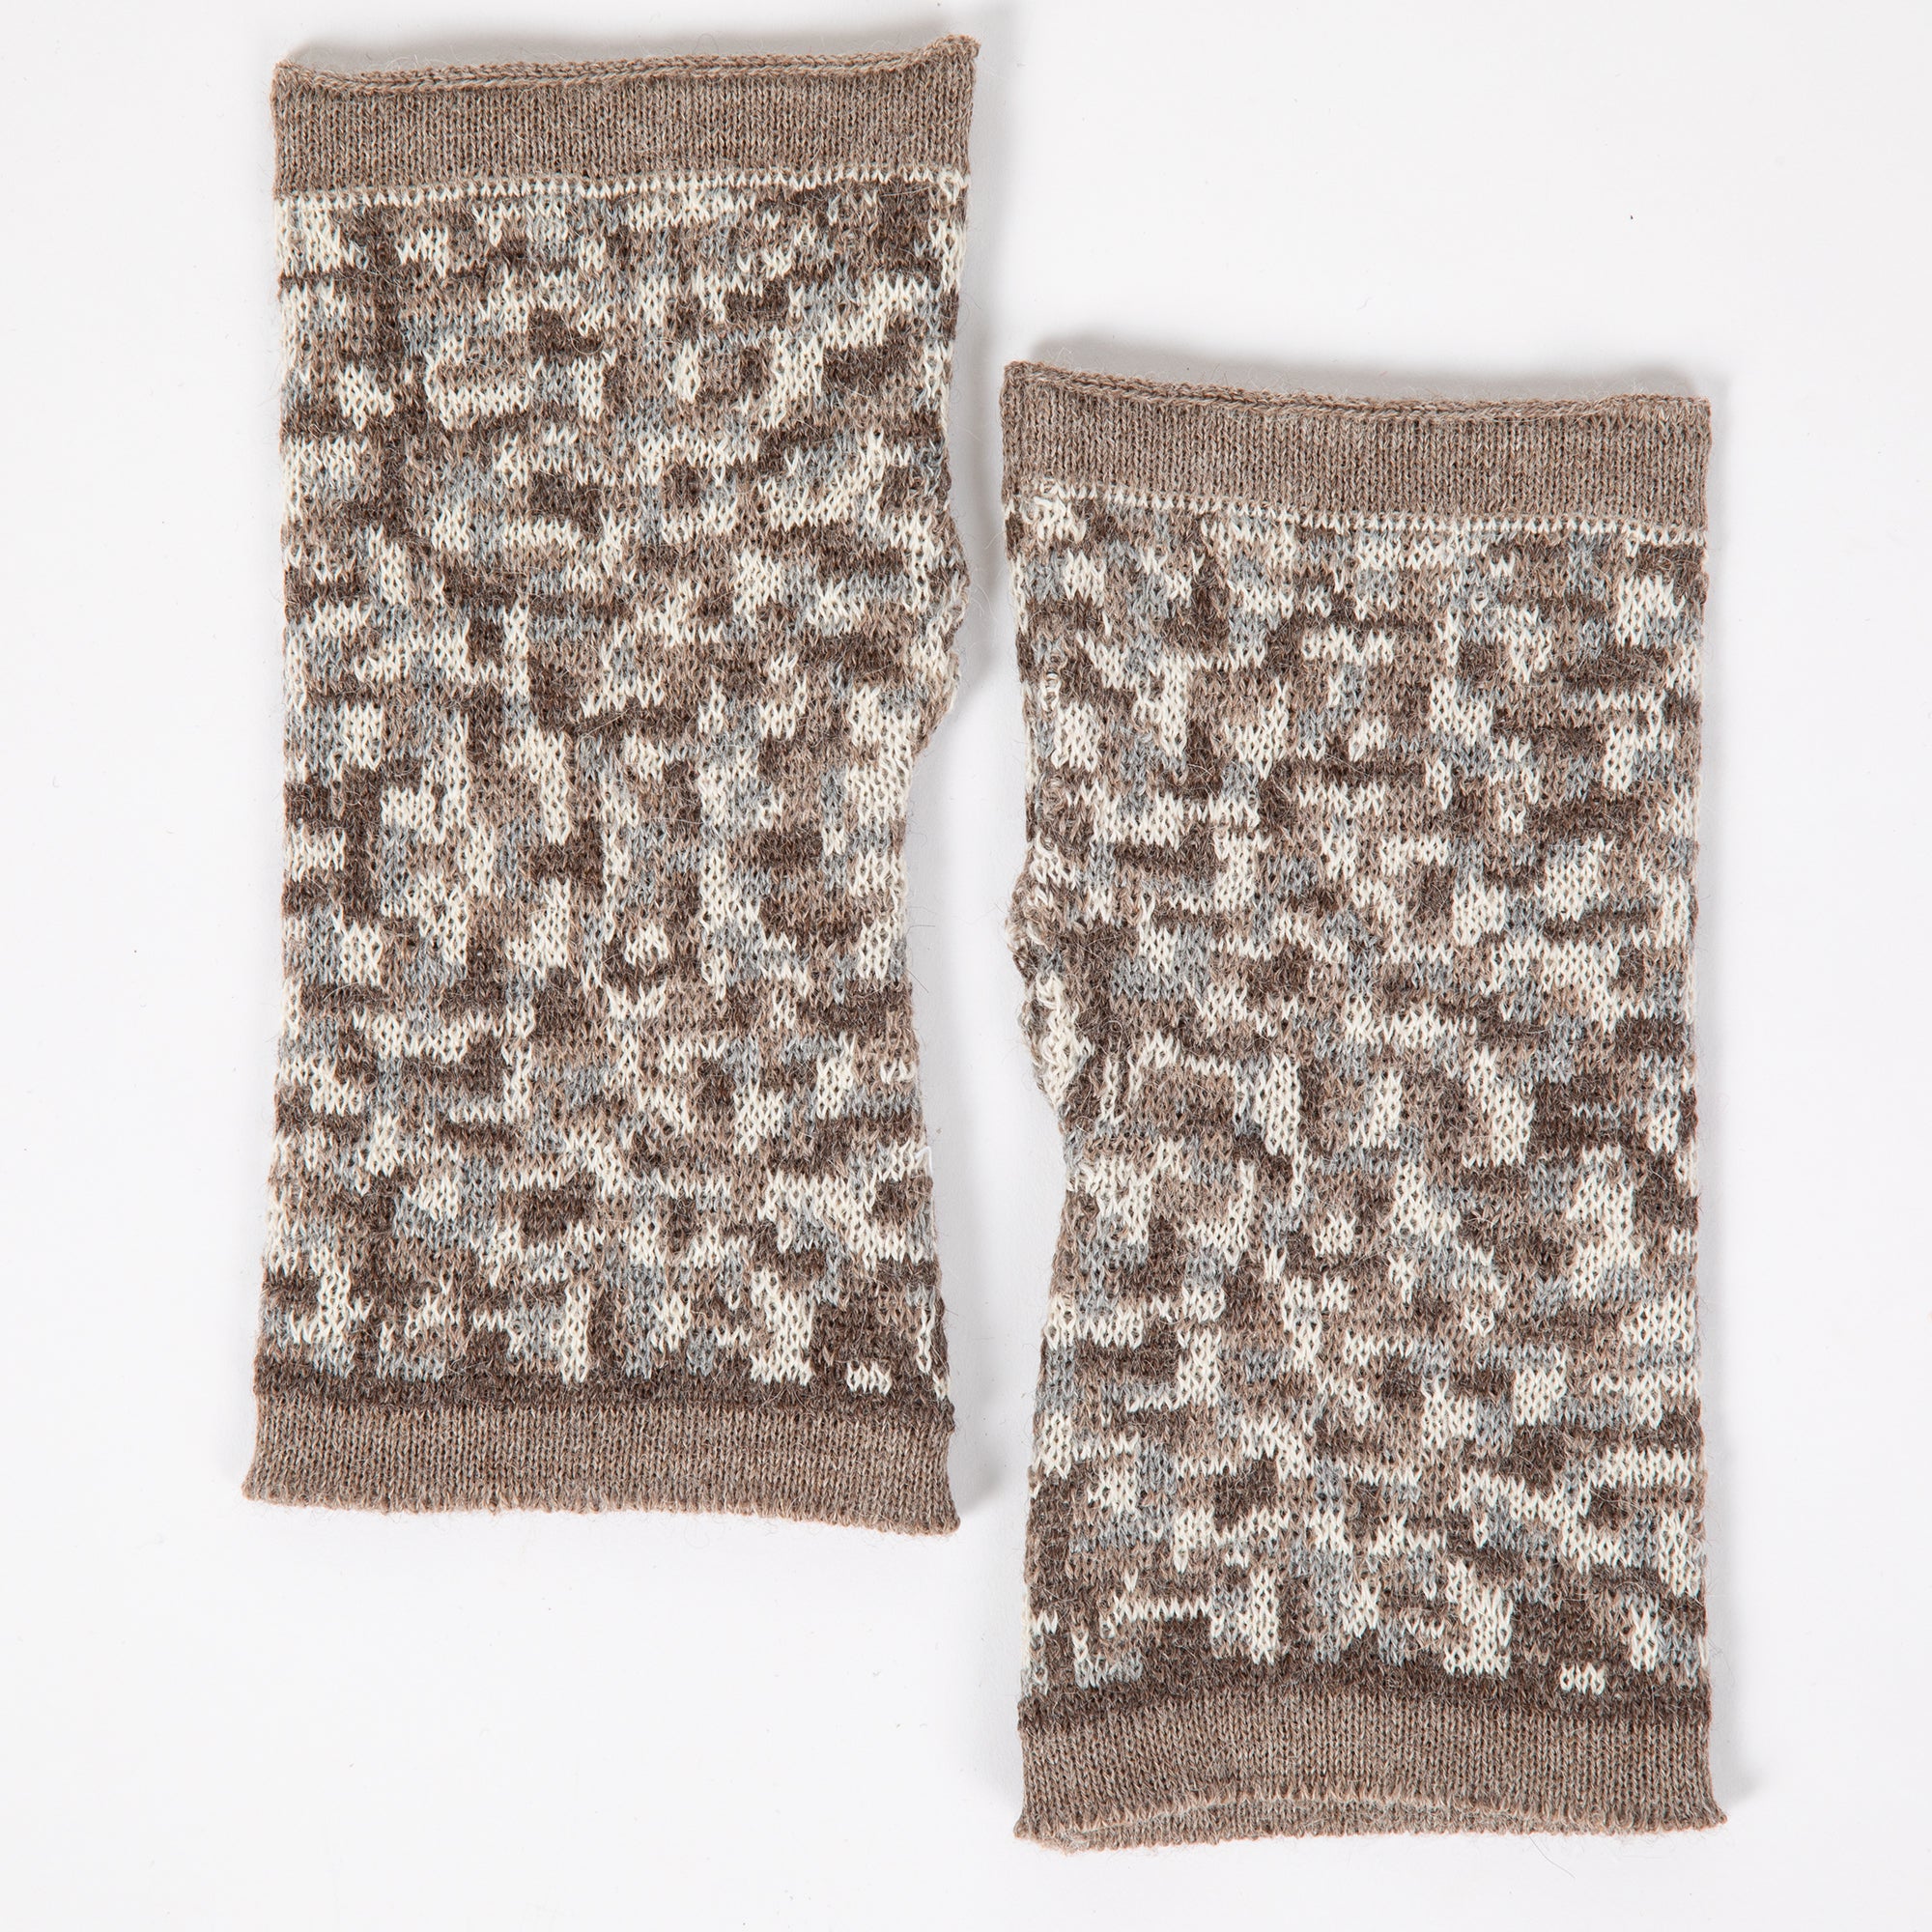 Small Squares Baby Alpaca Fingerless Mittens - Brown